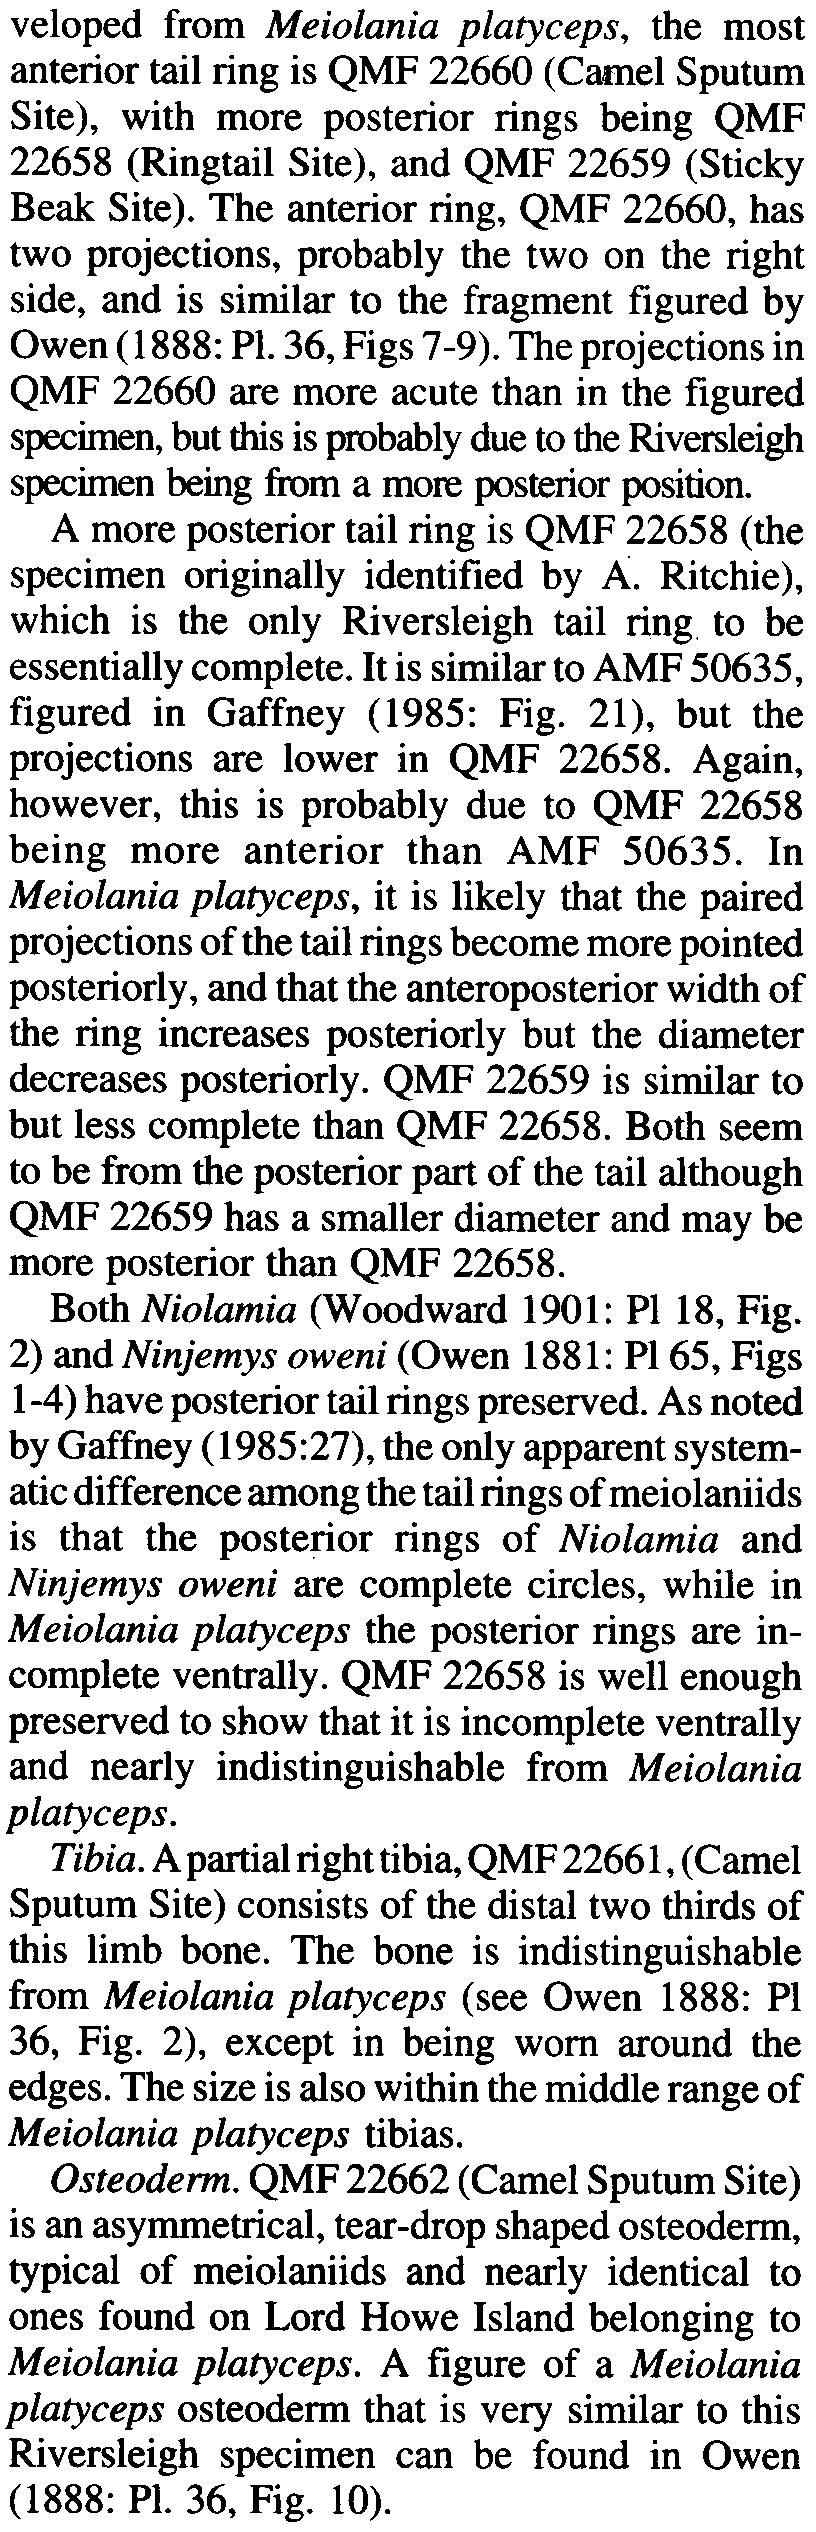 The anterior ring, QMF 22660, has two projections, probably the two on the right side, and is similar to the fragment figured by Owen (1888: PI. 36, Figs 7-9).